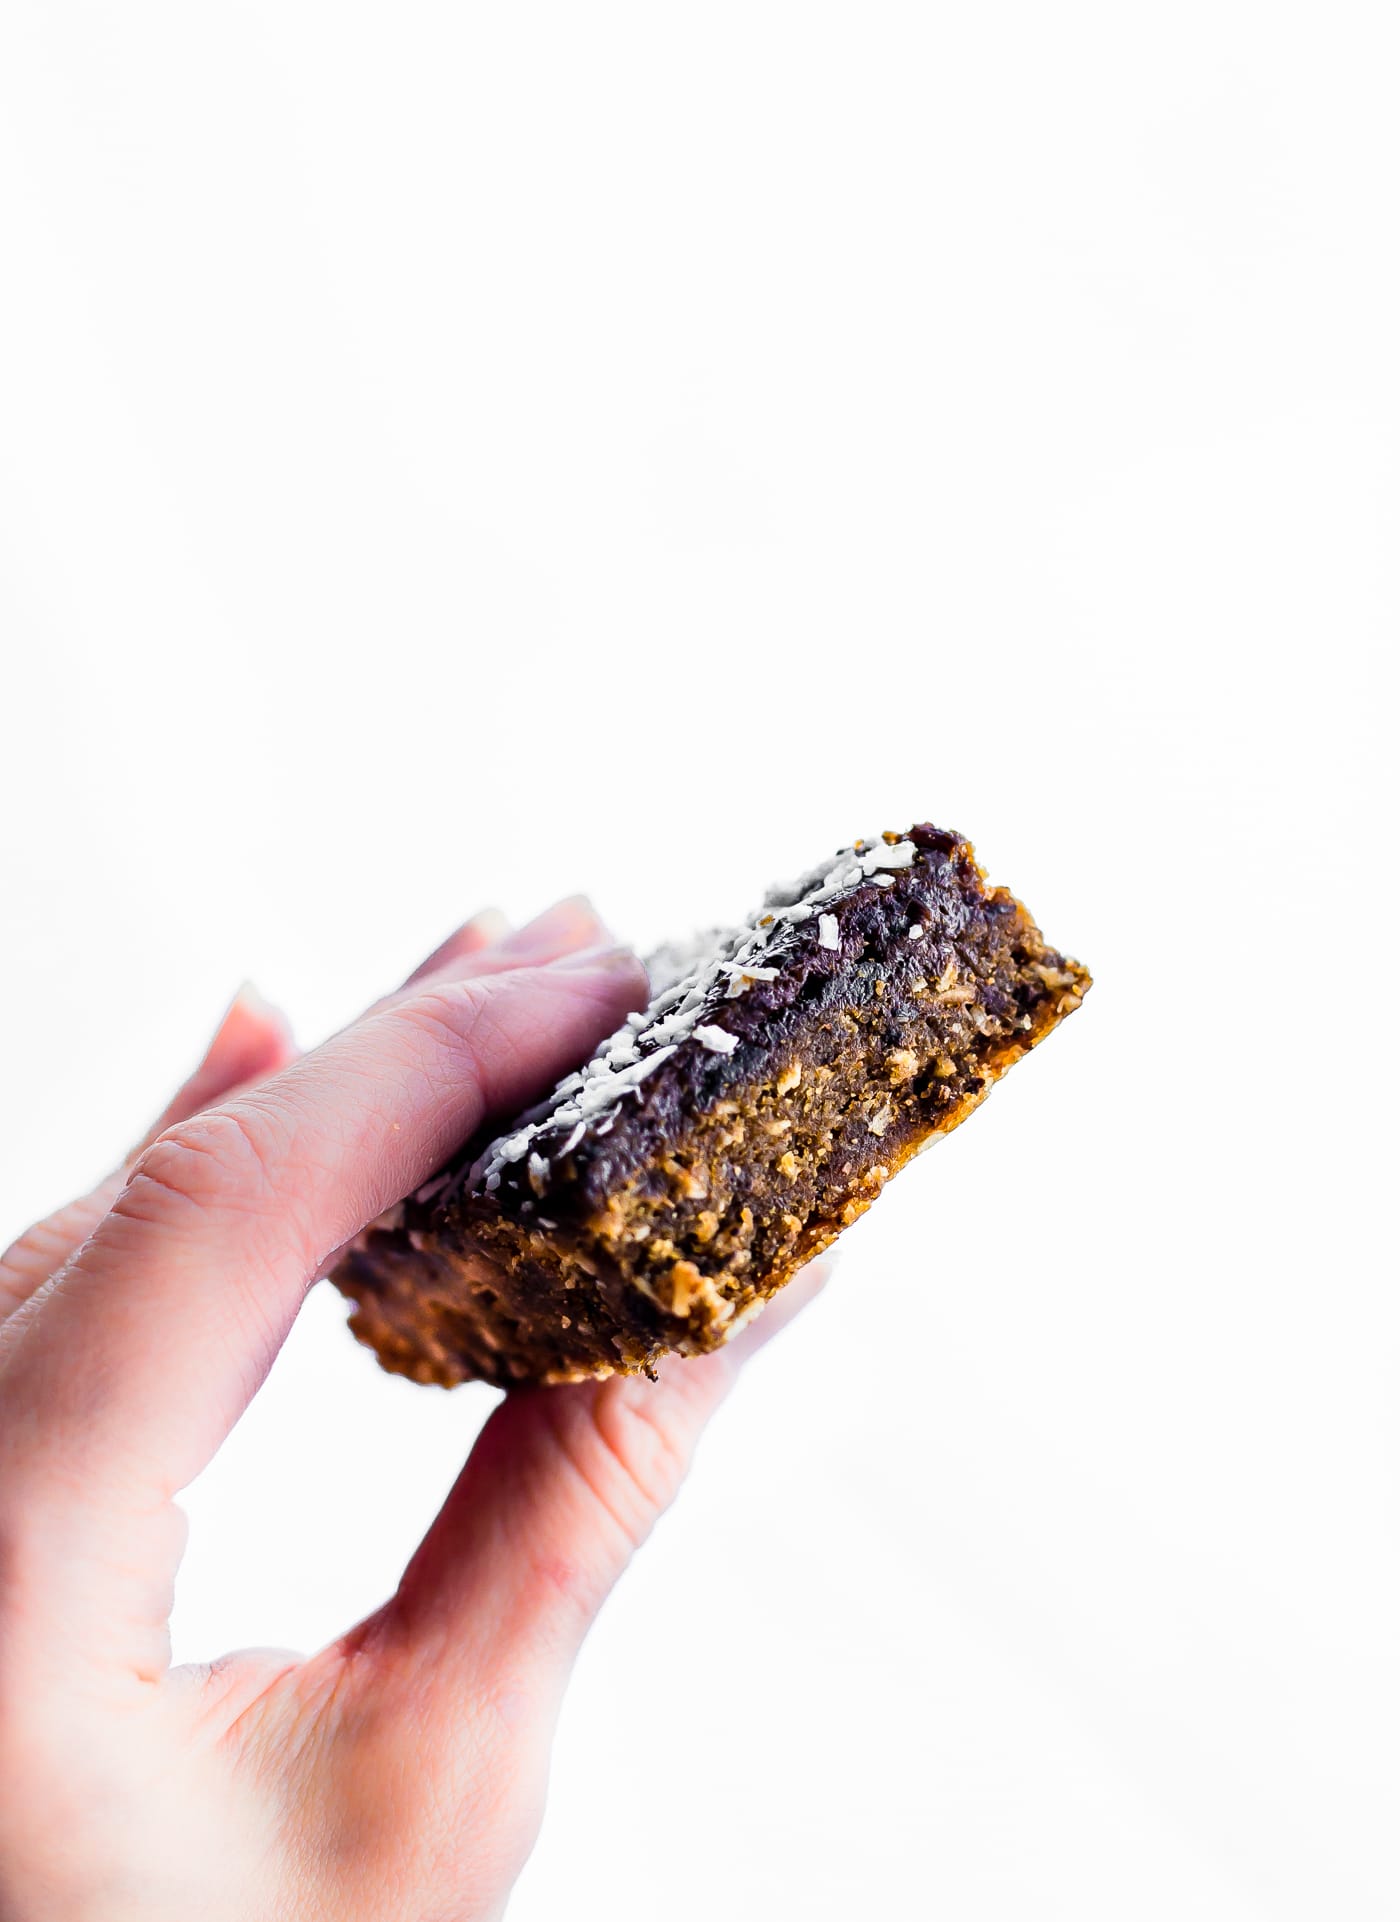 These Paleo Almond Butter Jelly Energy Bars are one of our favorite bars that fuel us for workouts and snacking on the go. Made with few ingredients; no oils and no sugar added. Blended and Baked in just 30 minutes, Which makes them pretty amazing! So chewy and flavorful that you'd never know they were healthy. Freezer friendly.